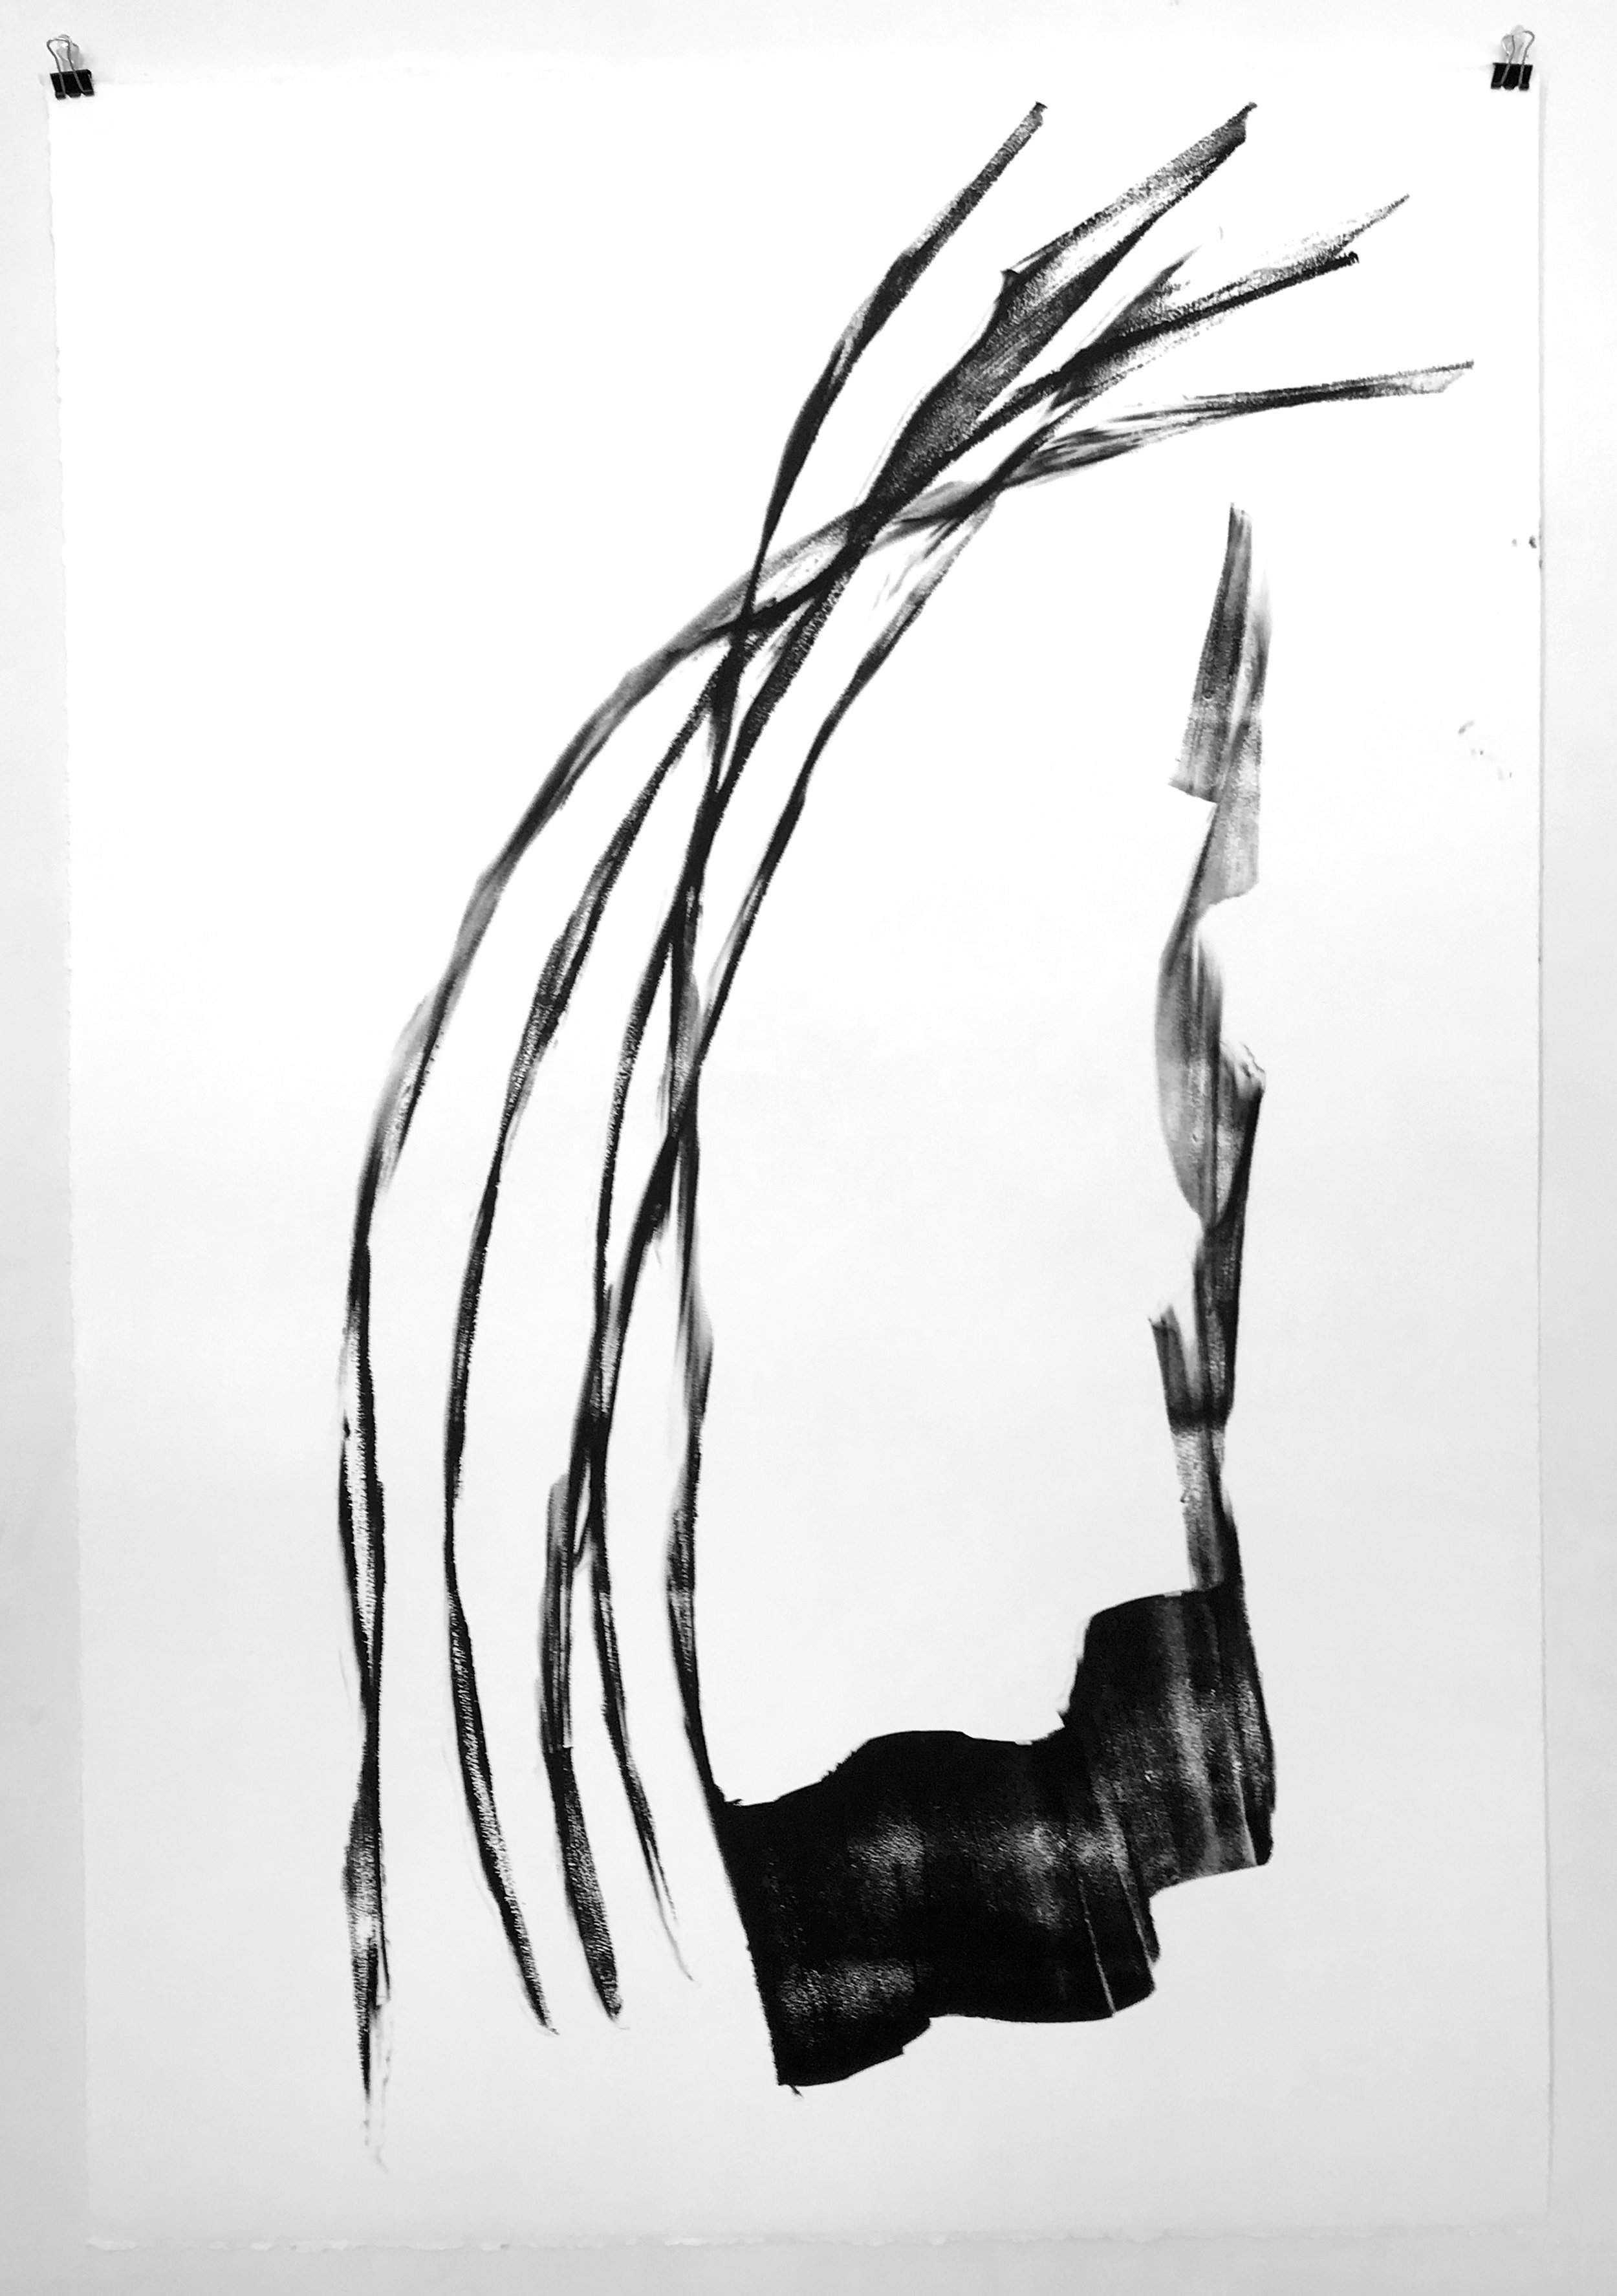  Slashes, 2019, Litho ink on paper, 44 x 30 inches (unframed) 